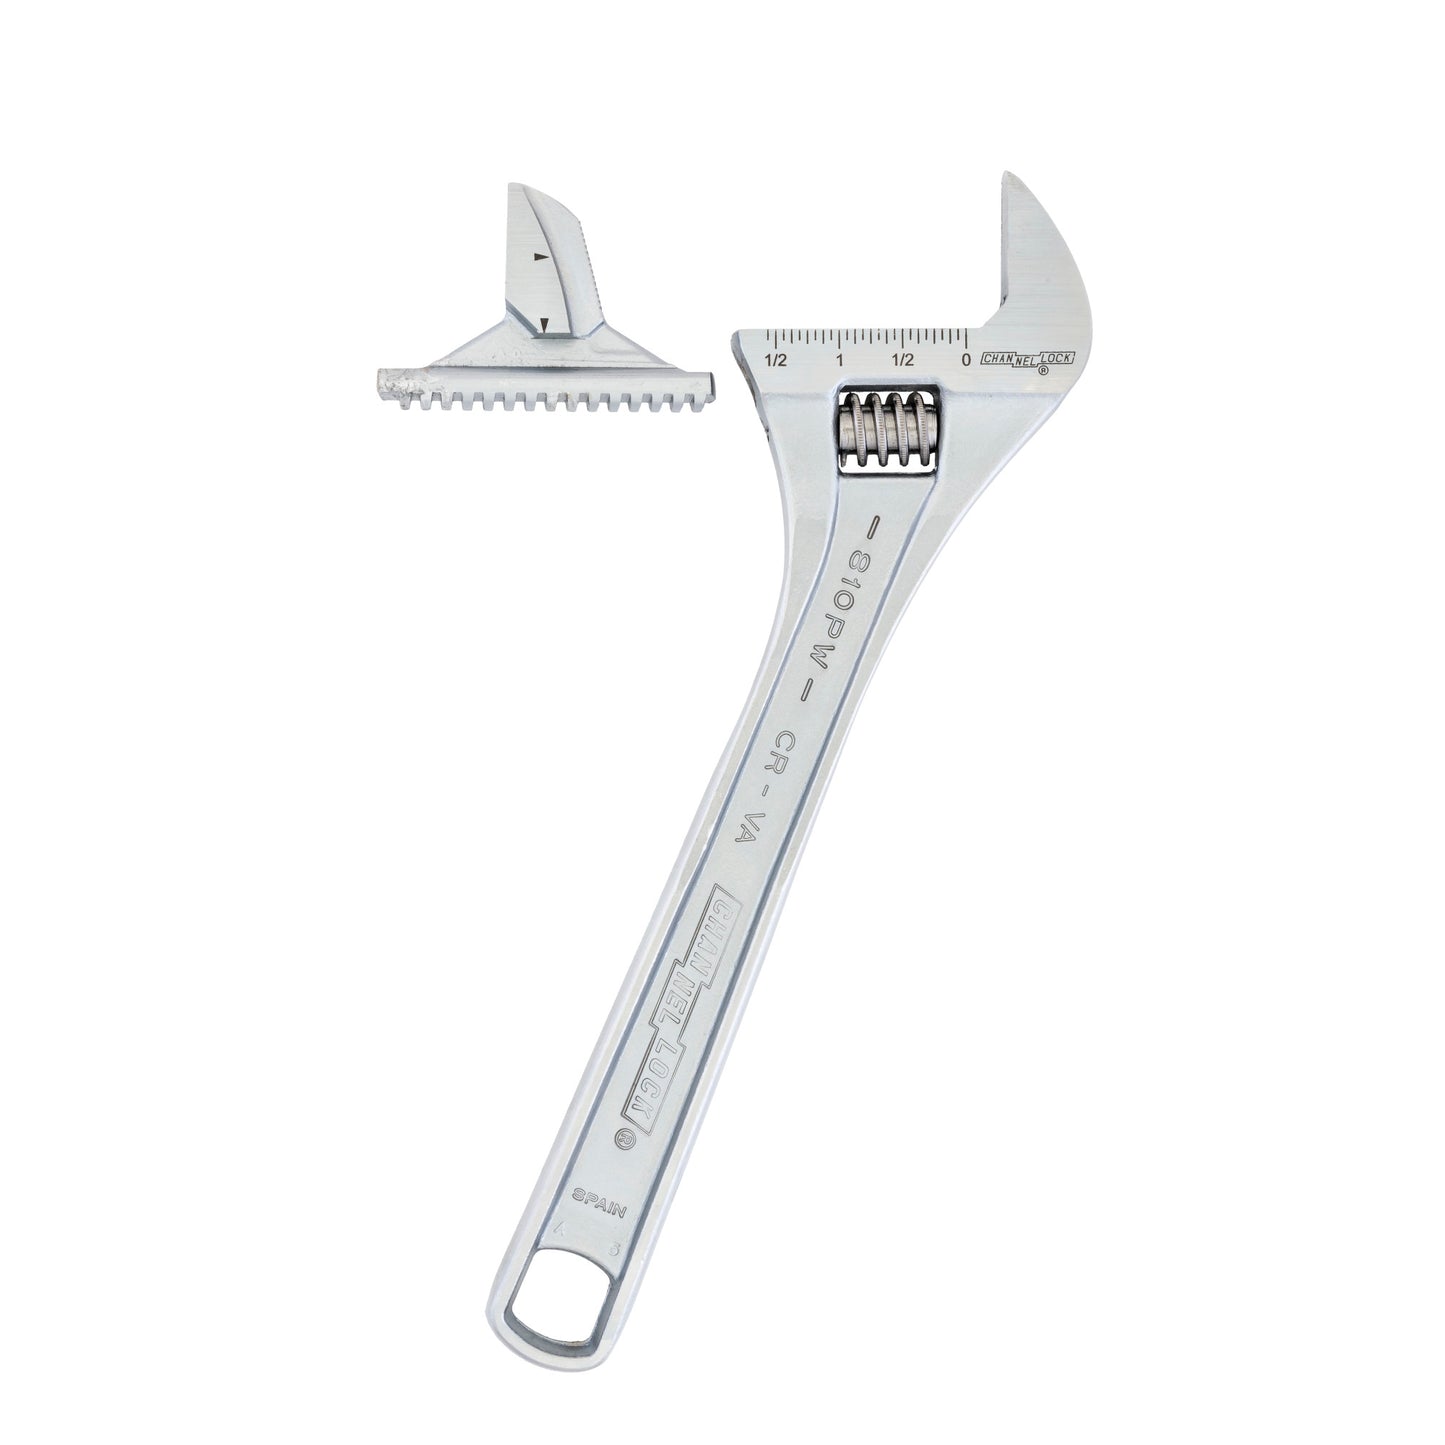 6-inch Reversible Jaw Adjustable Wrench (806PW)